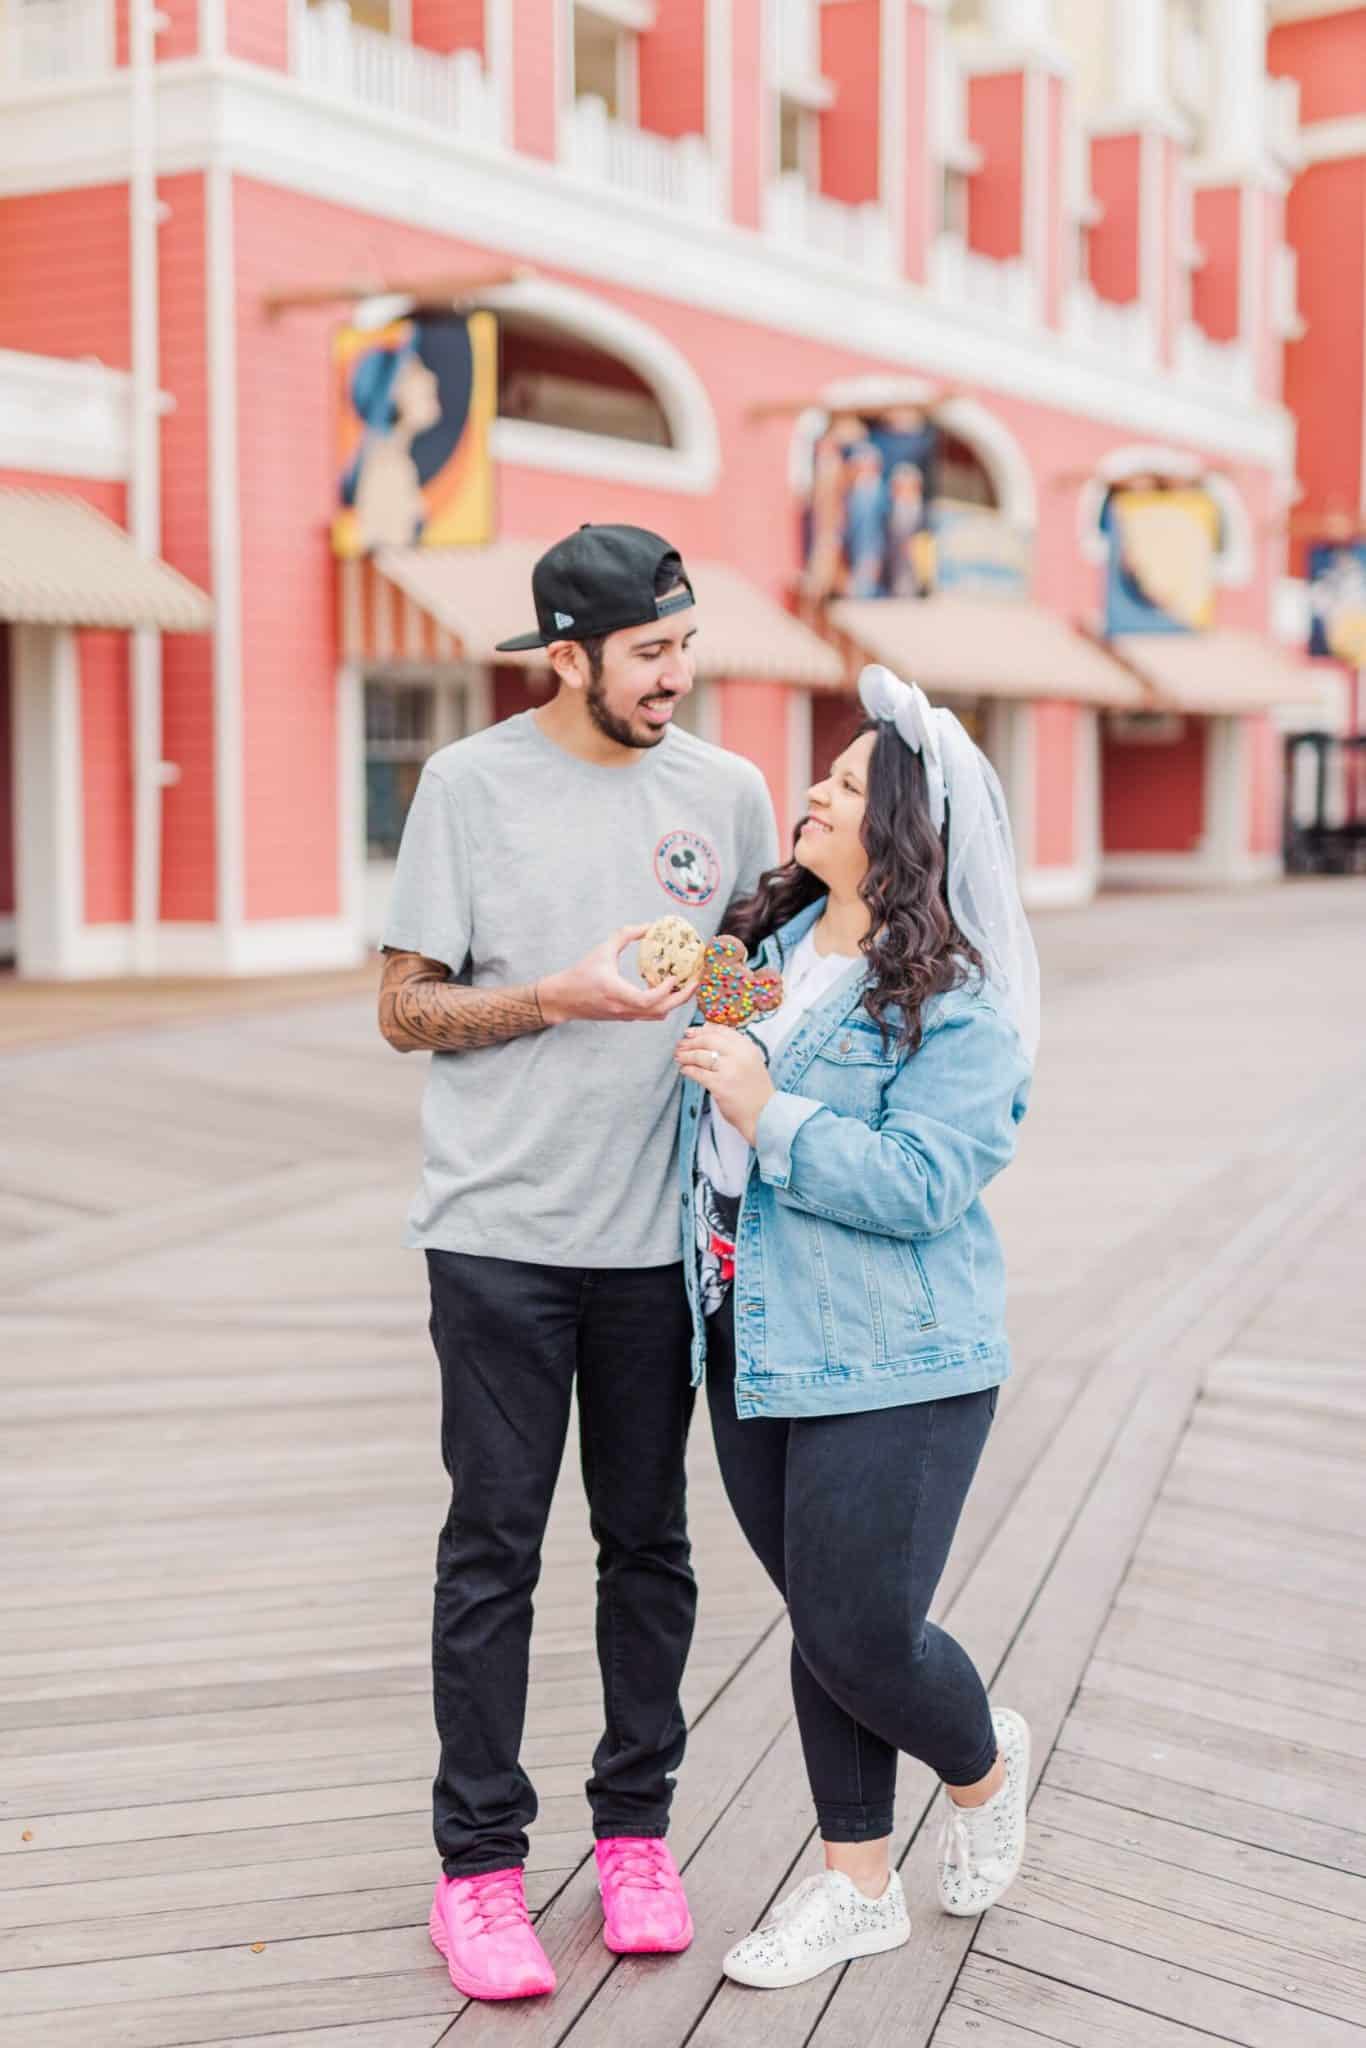 Newly engaged couple at Disney World holding Mickey Mouse Ice creams